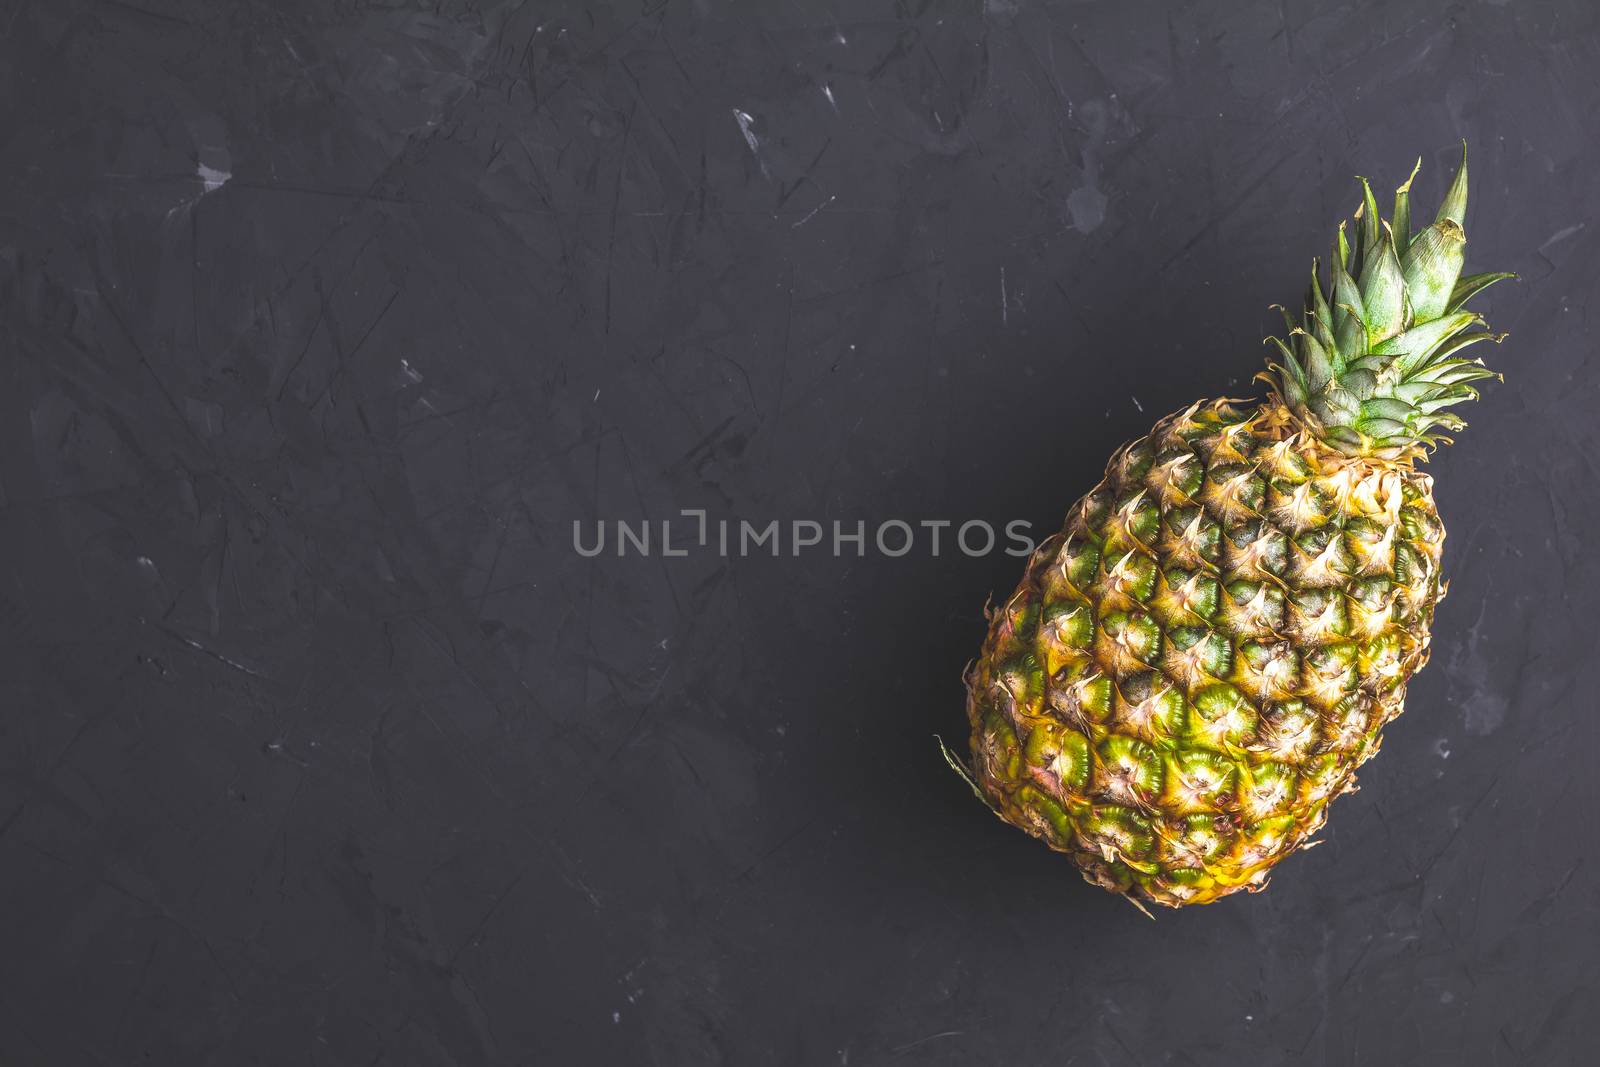 Pineapple on black stone concrete textured surface background. Top view with copy space for your text.